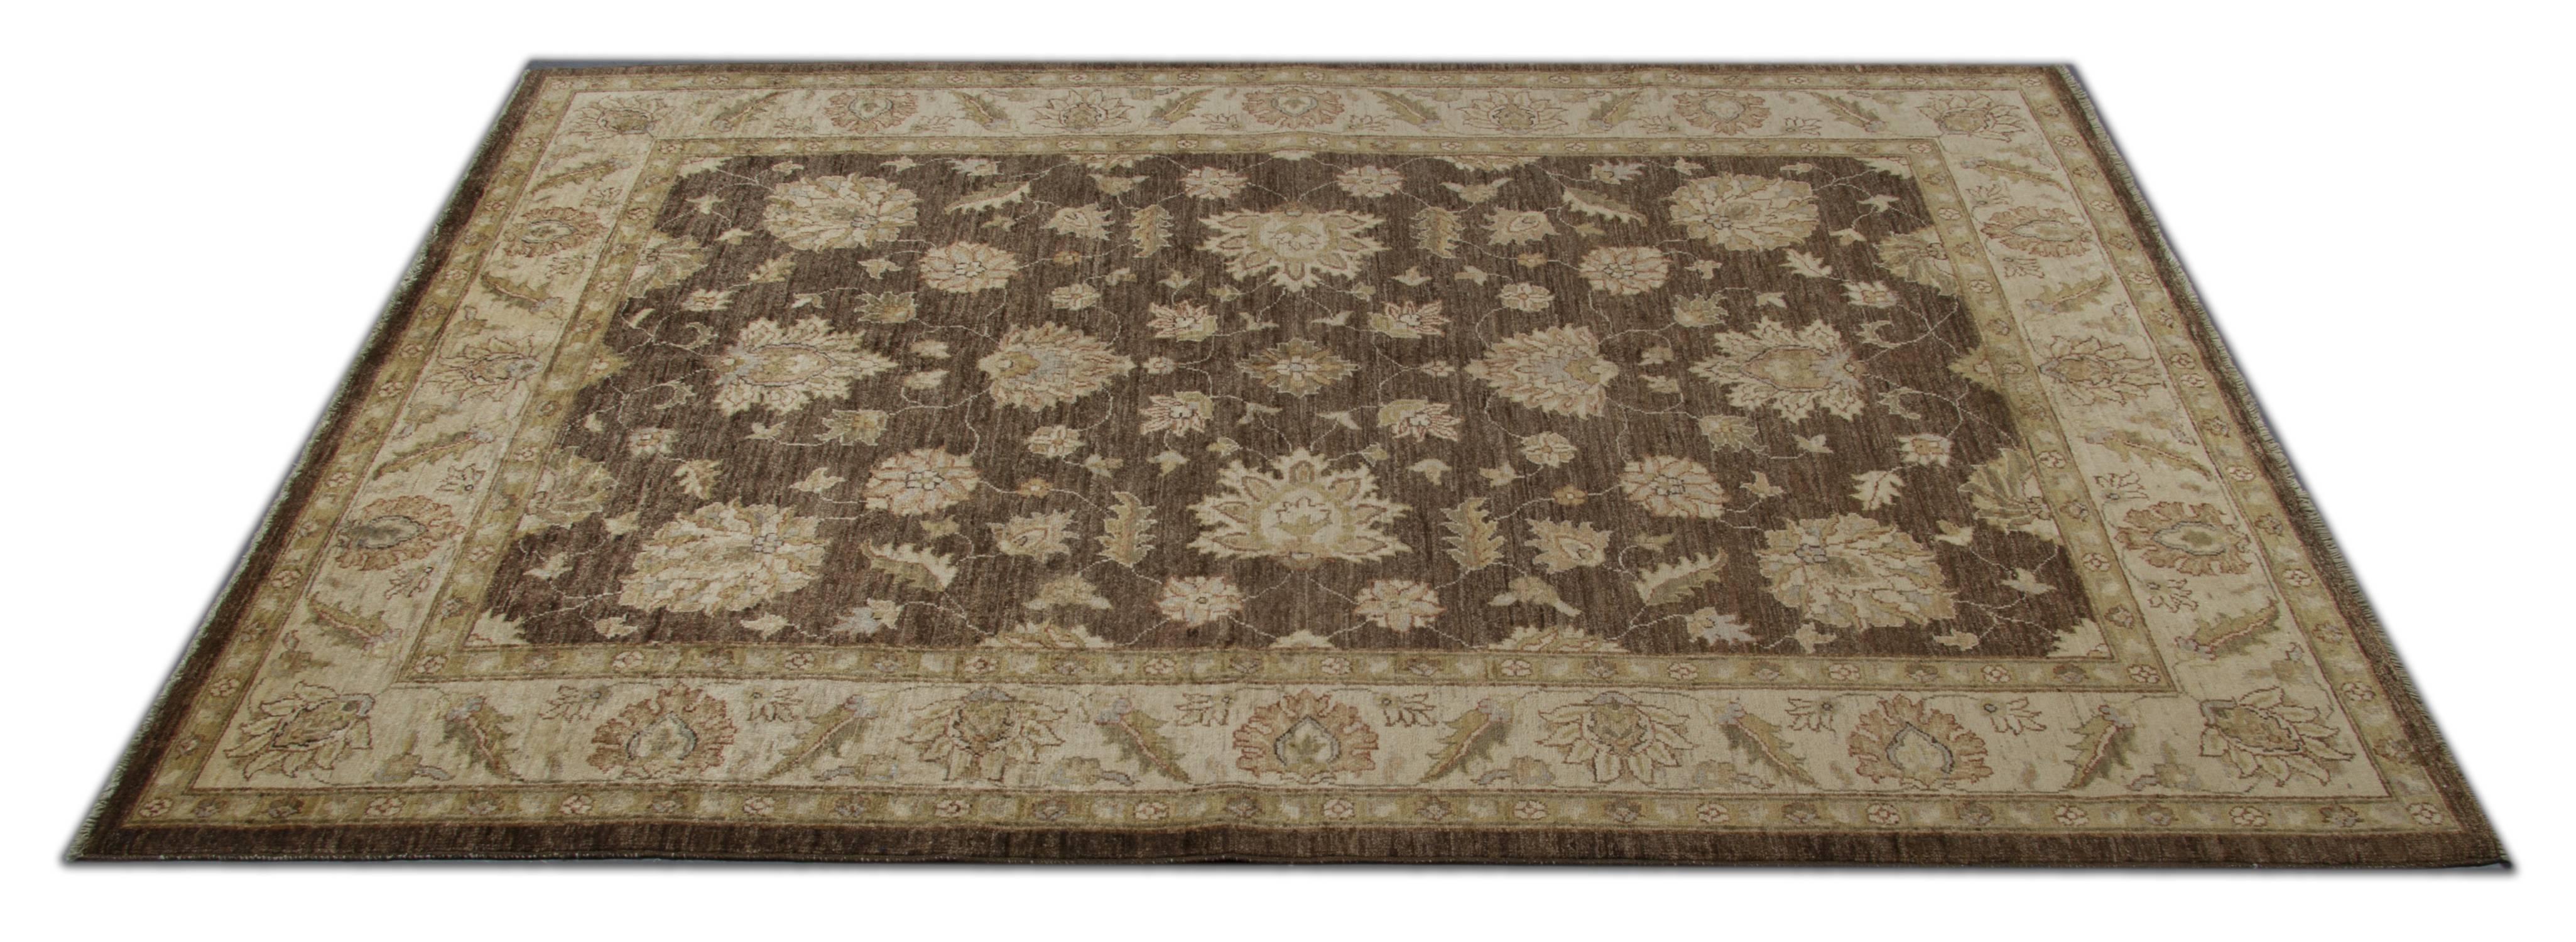 This a luxury fine Ziegler Mahal gold beige rug with a beautiful deep red border. The floral rug is woven with hand-spun wool. These luxury rugs are made with 100% natural organic vegetable dyes. The large-scale design makes Sultanabad rugs the most